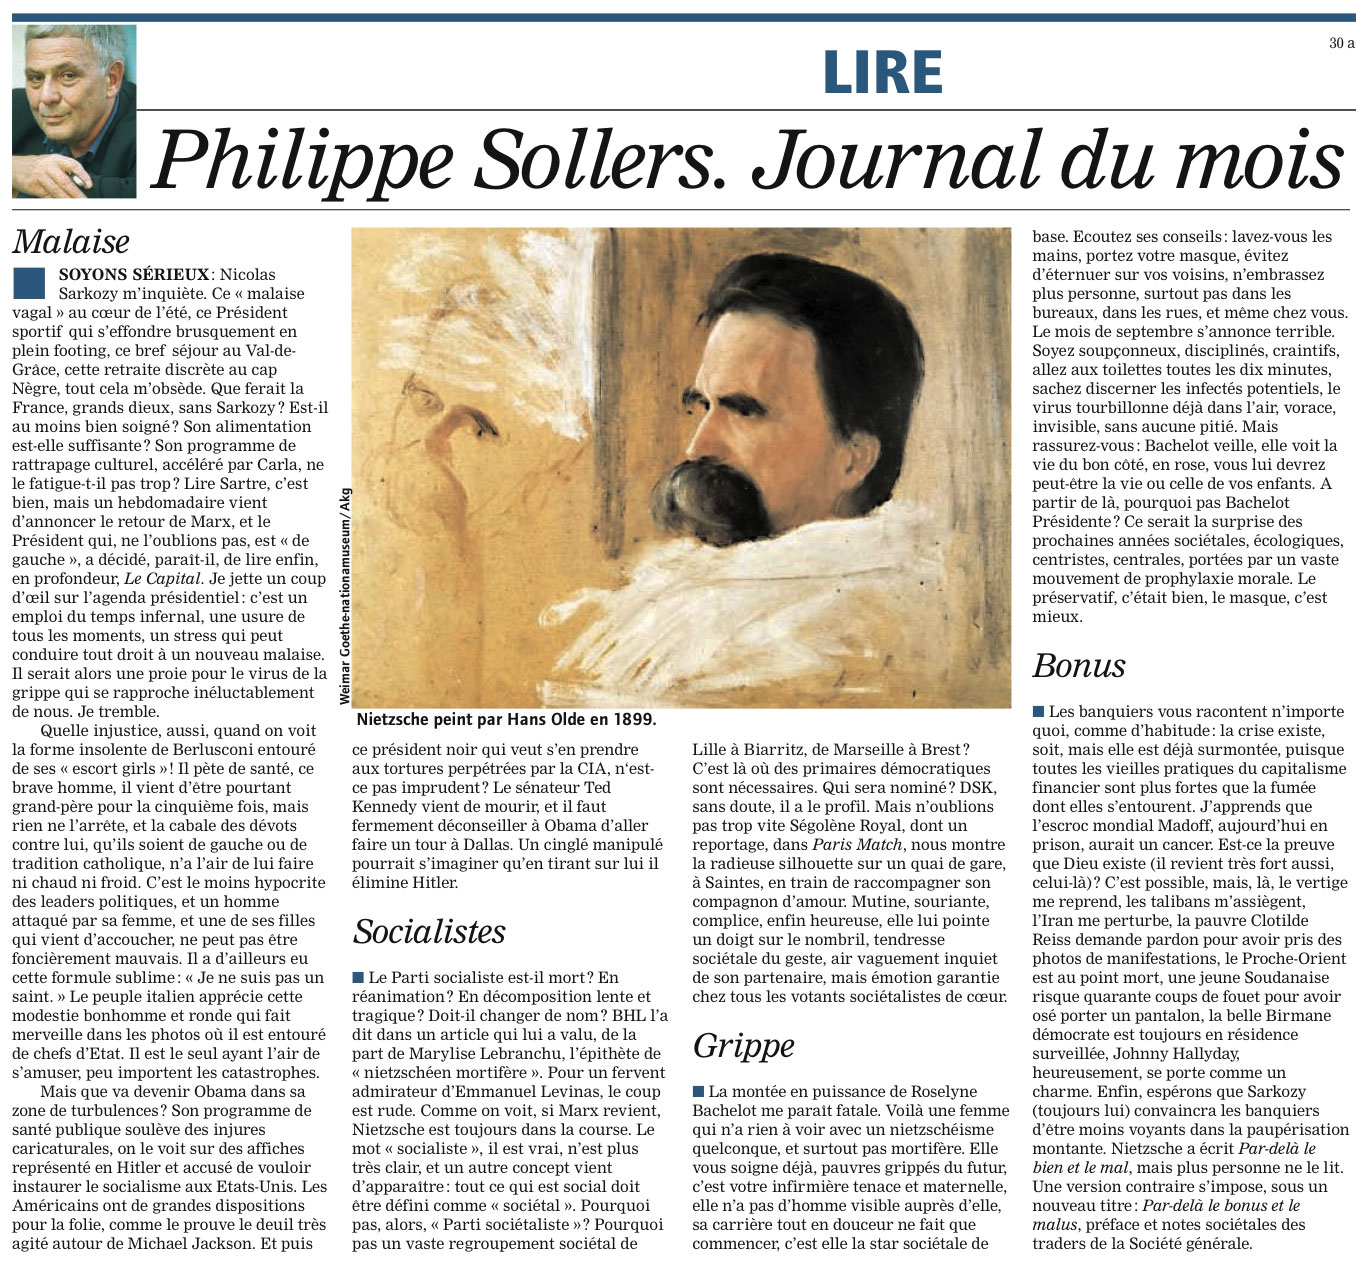 Philippe Sollers Journal du mois